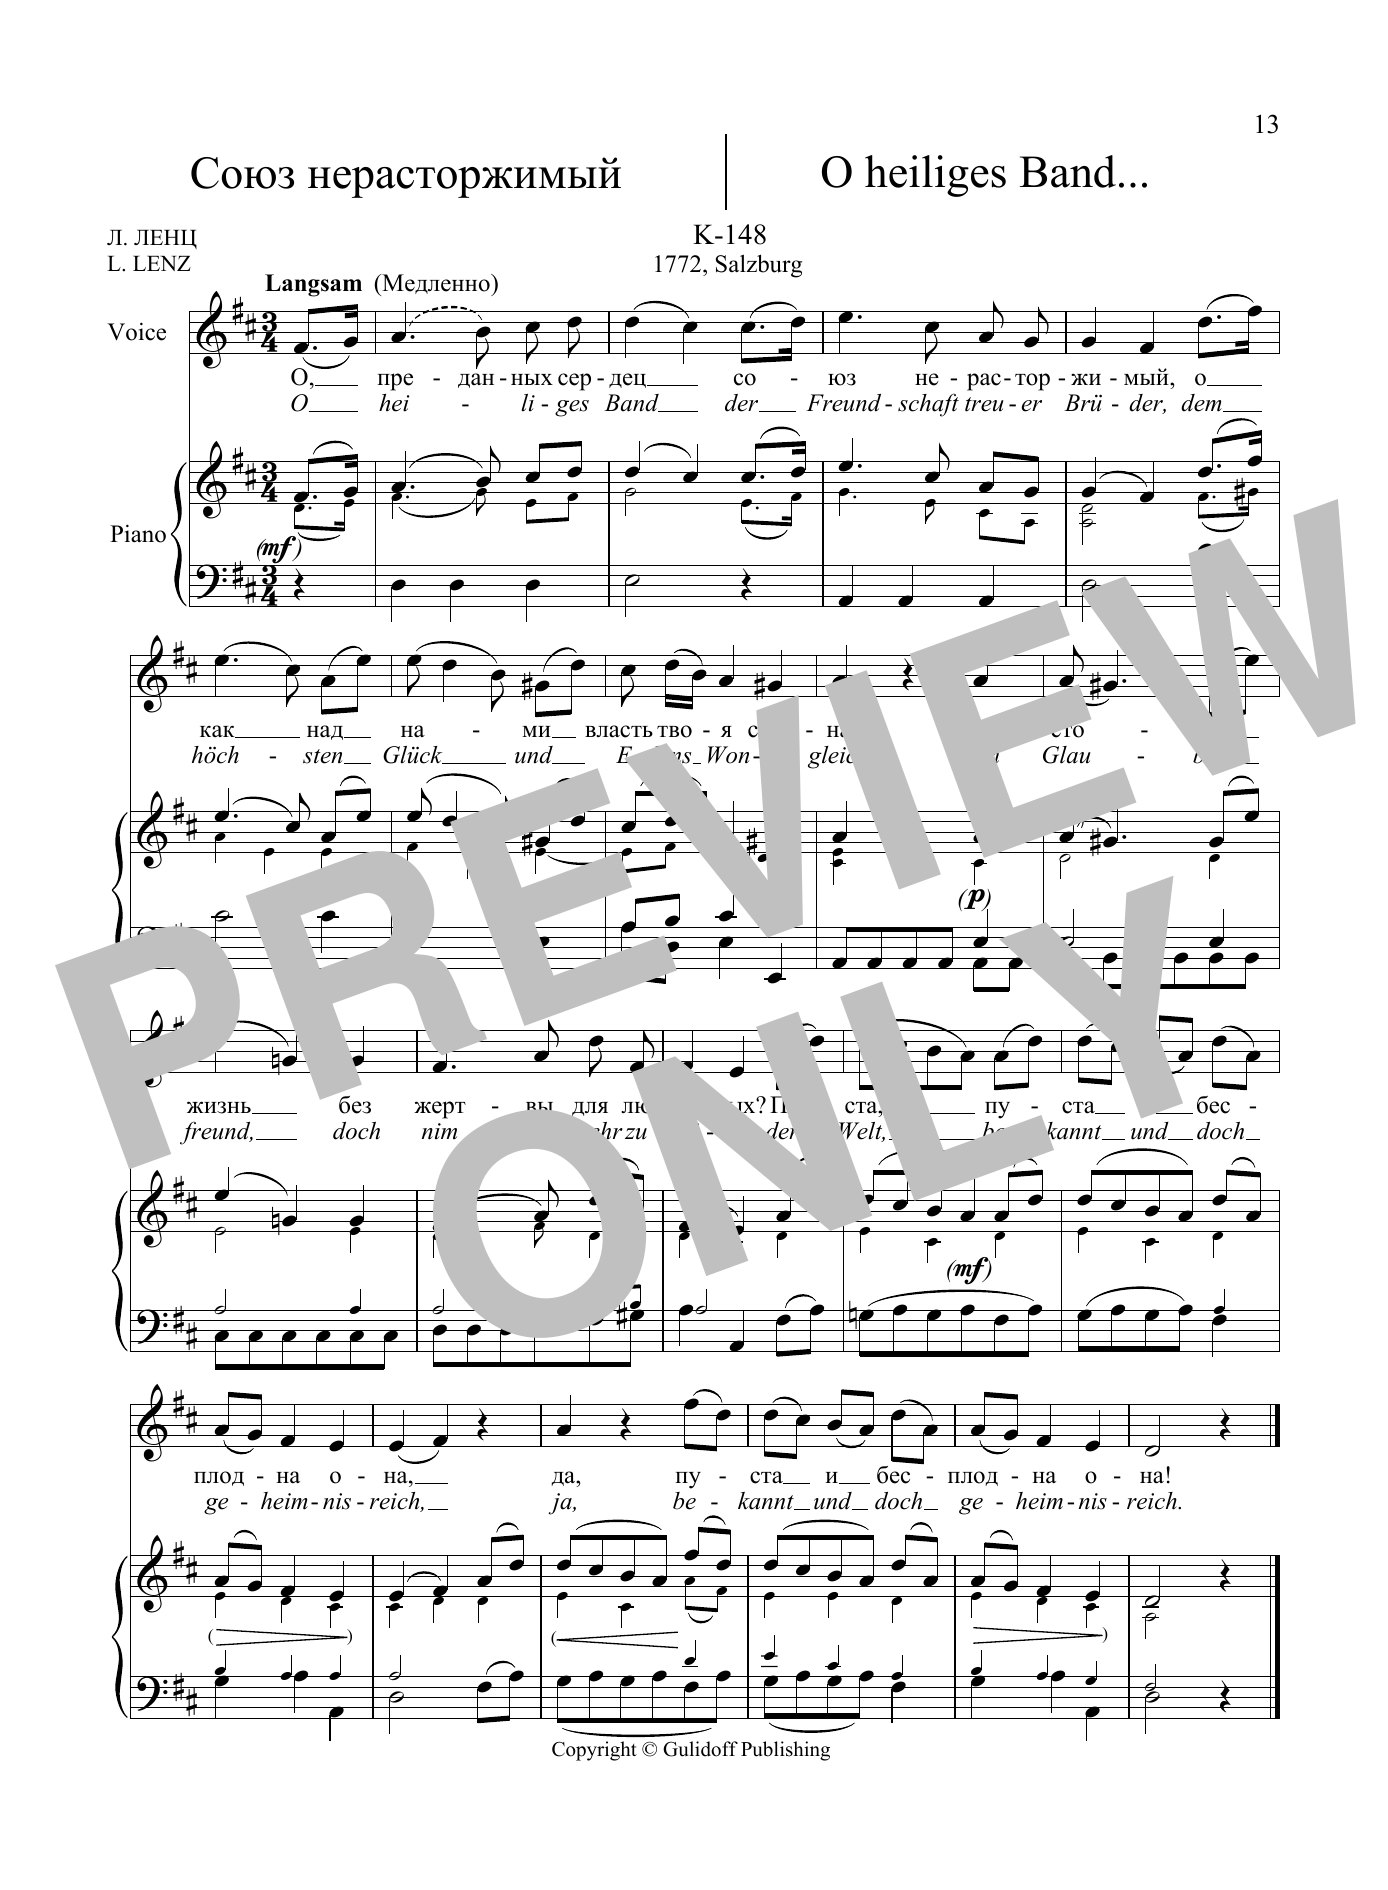 Download Wolfgang Amadeus Mozart 36 Songs Vol. 1: O Heiliges Band, K. 14 Sheet Music